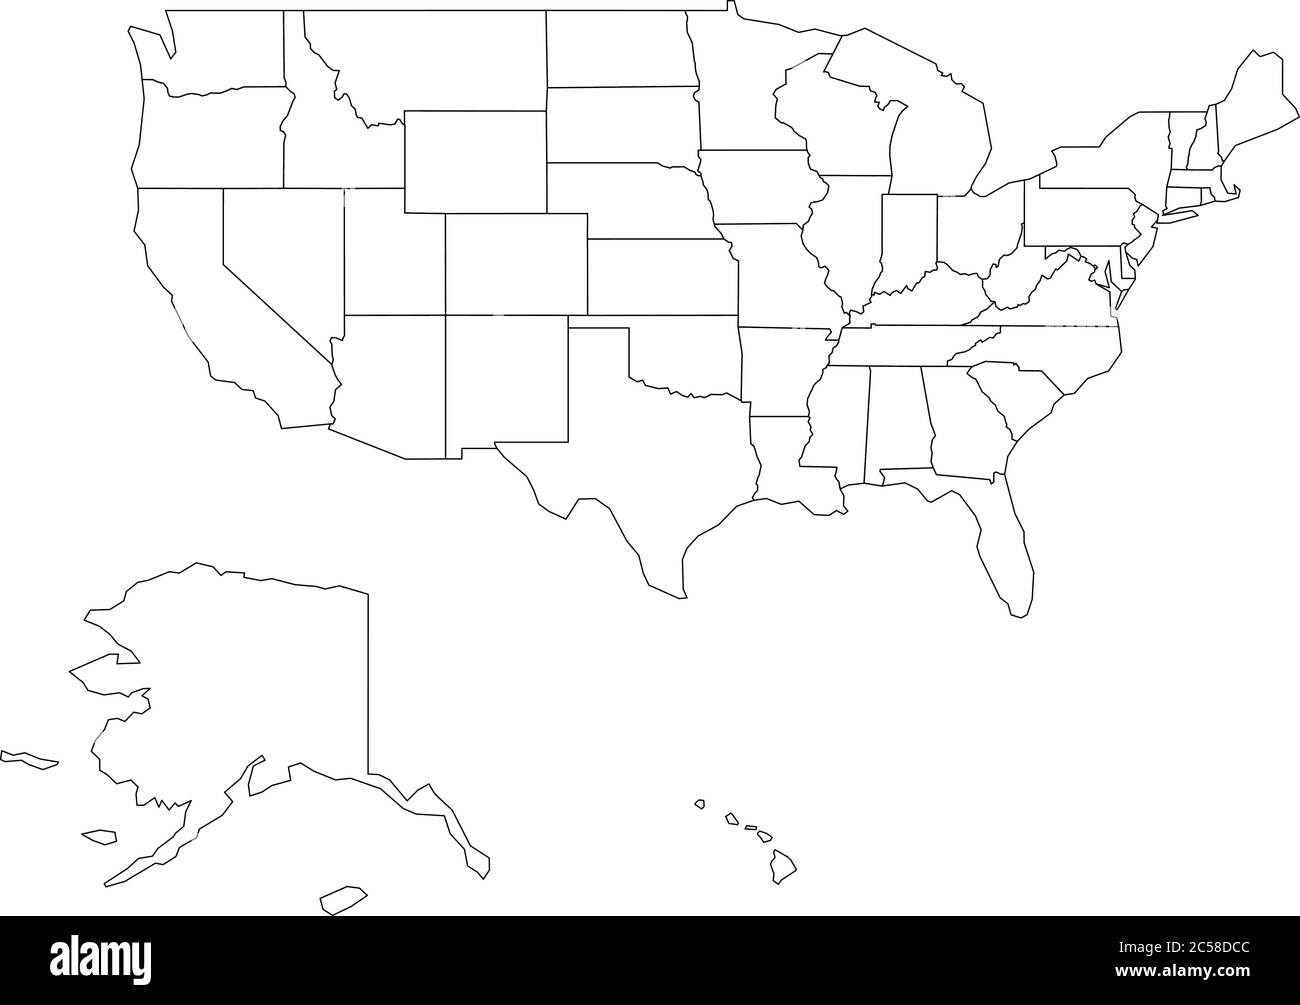 blank-black-vector-outline-map-of-usa-united-states-of-america-stock